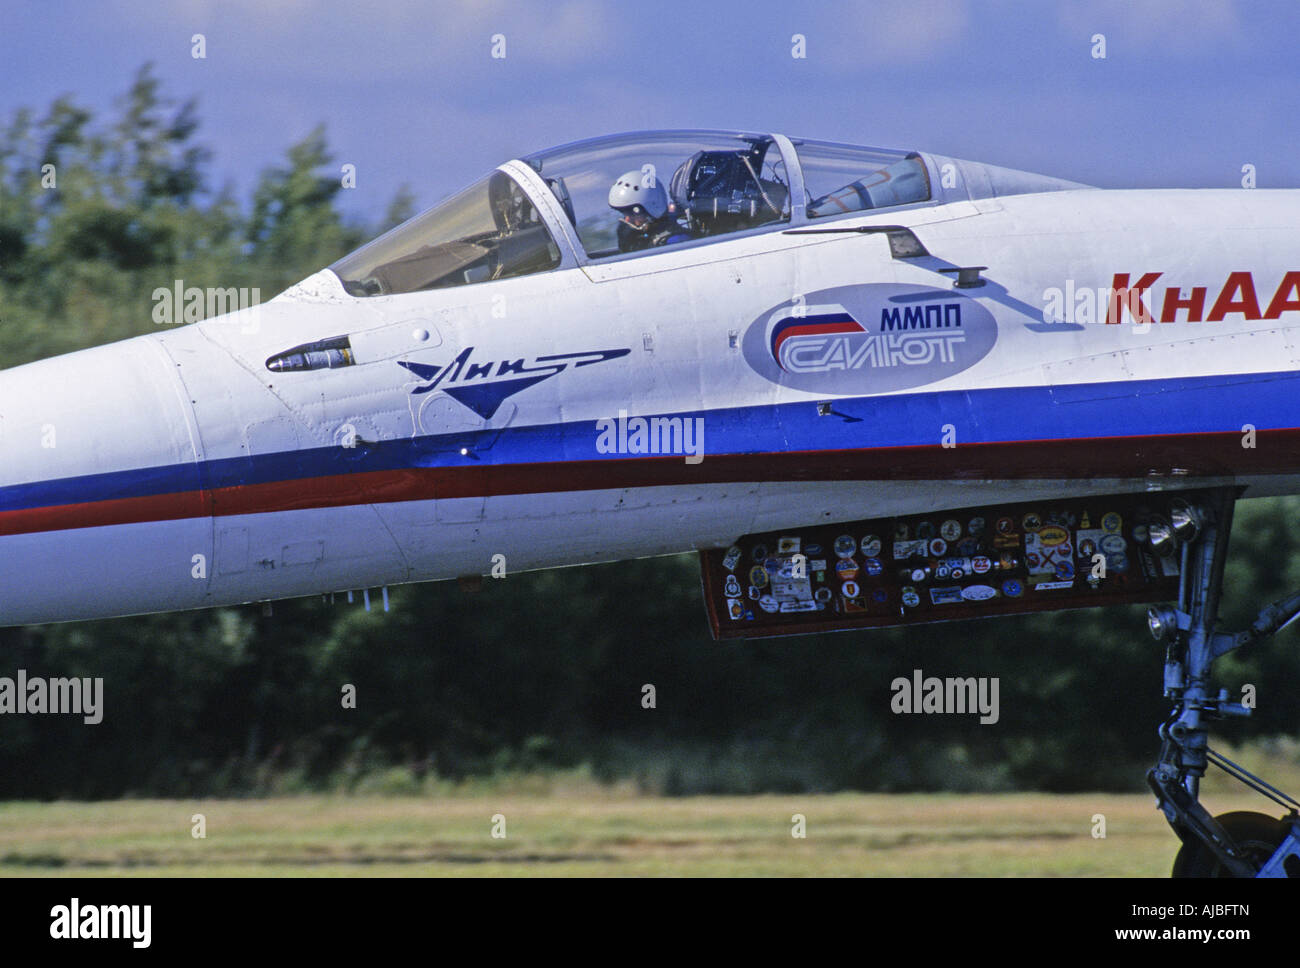 The Sukhoi Su-27 Flanker  jet fighter aircraft Stock Photo